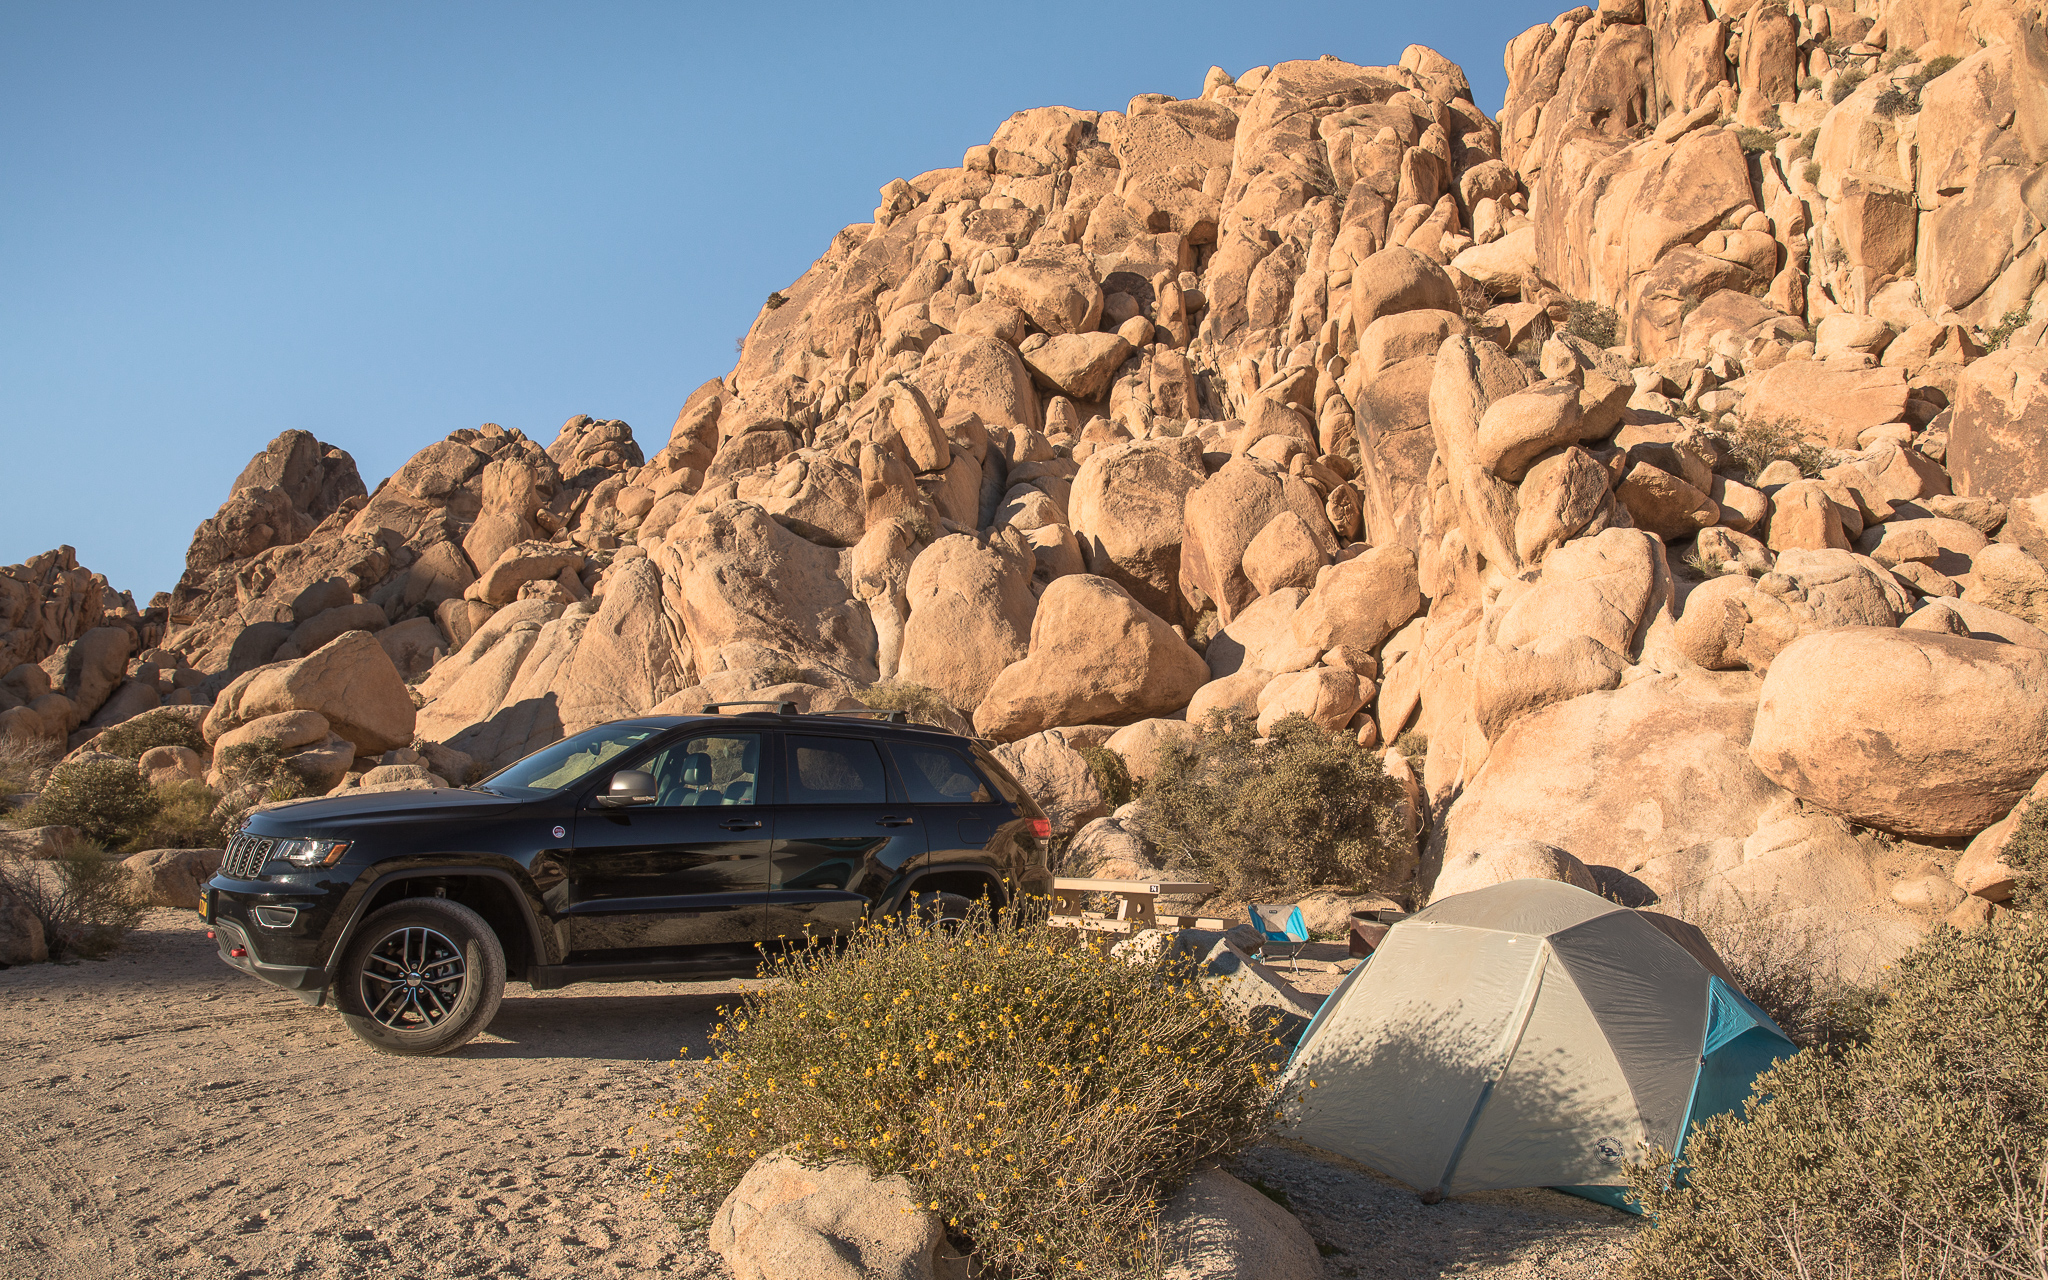 Car and tent at campsite in Indian Cove Campground in Joshua Tree National Park